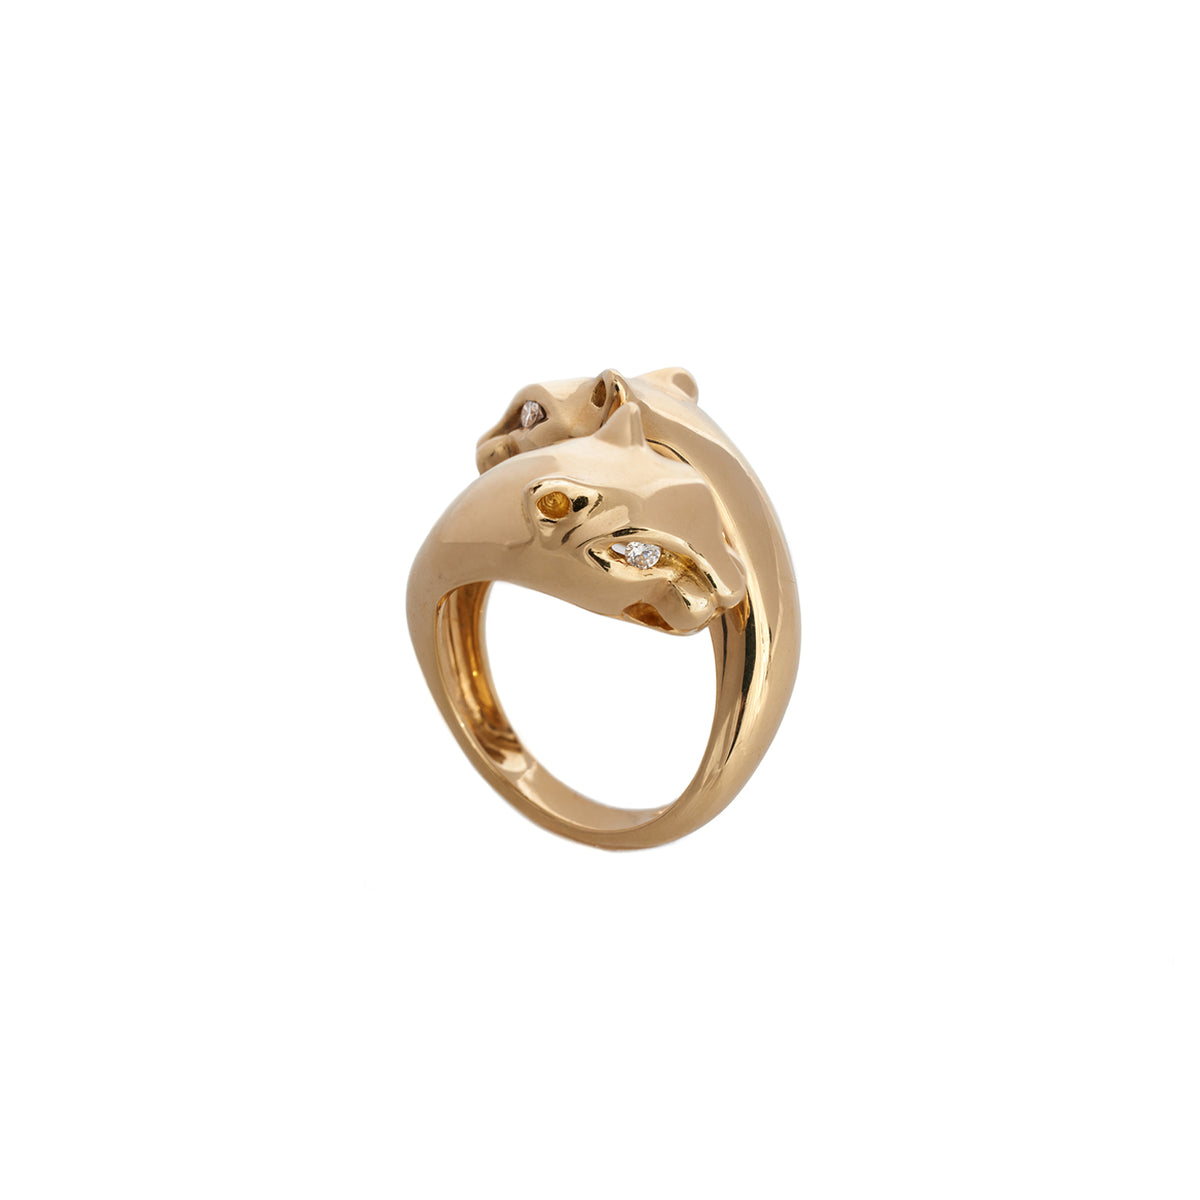 Petite Passionate Panther Ring – Sidney Garber